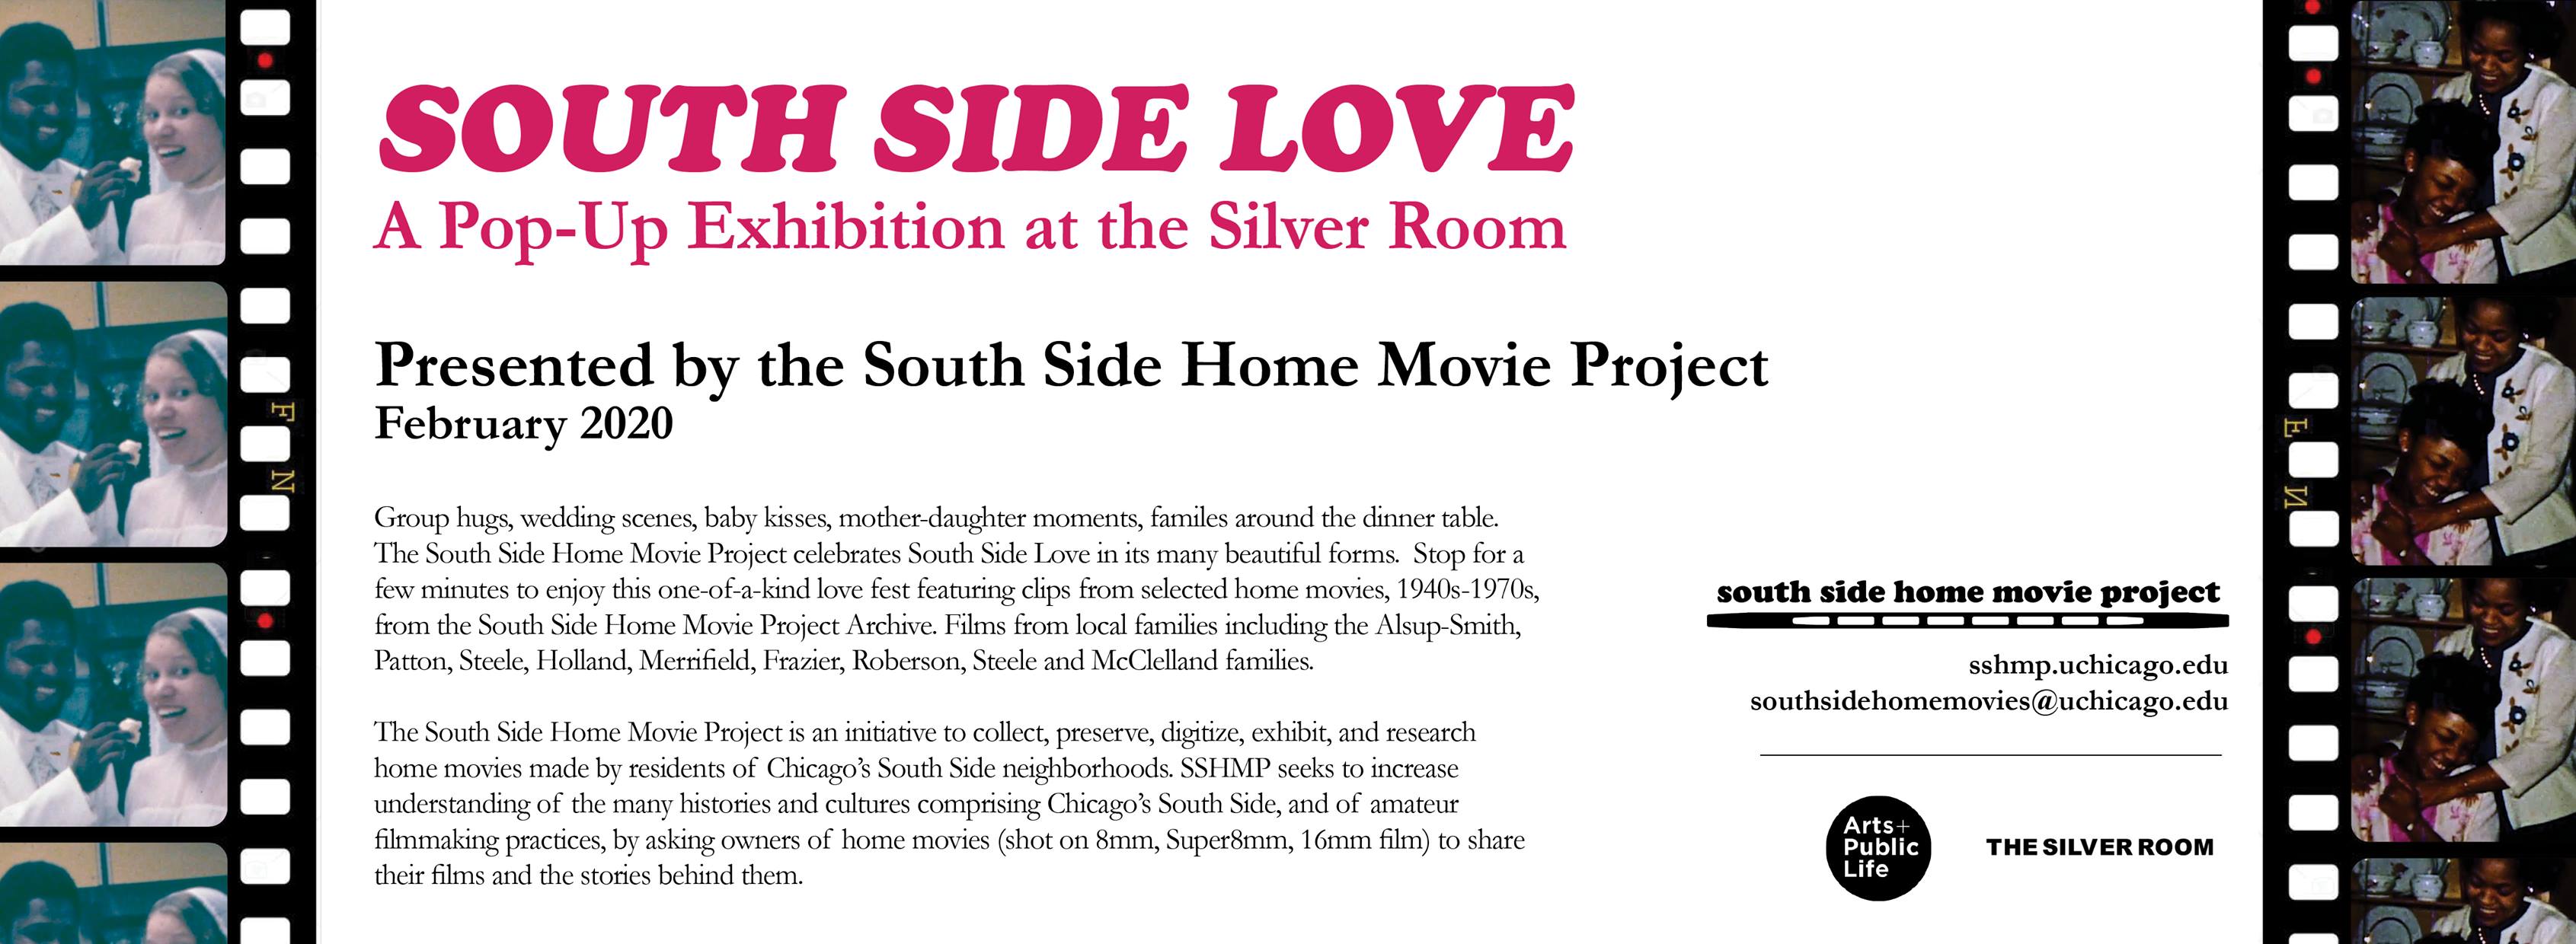 South Side Love: Home Movies Pop-Up Exhibition